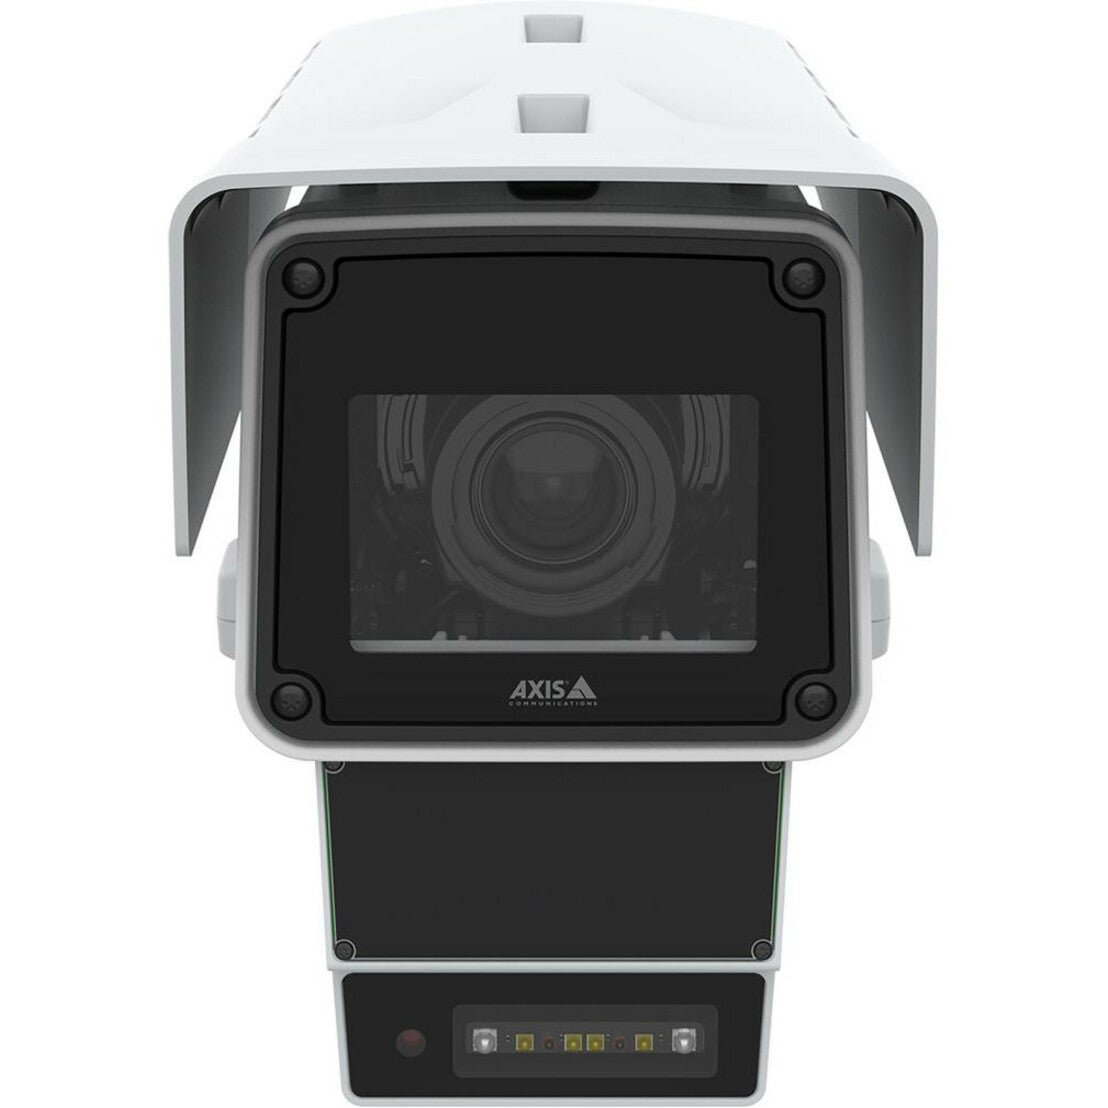 AXIS 02420-001 Q1656-DLE Radar-Video Fusion Camera, 4MP, PTZ, Motion Detection, Wide Dynamic Range, IP66